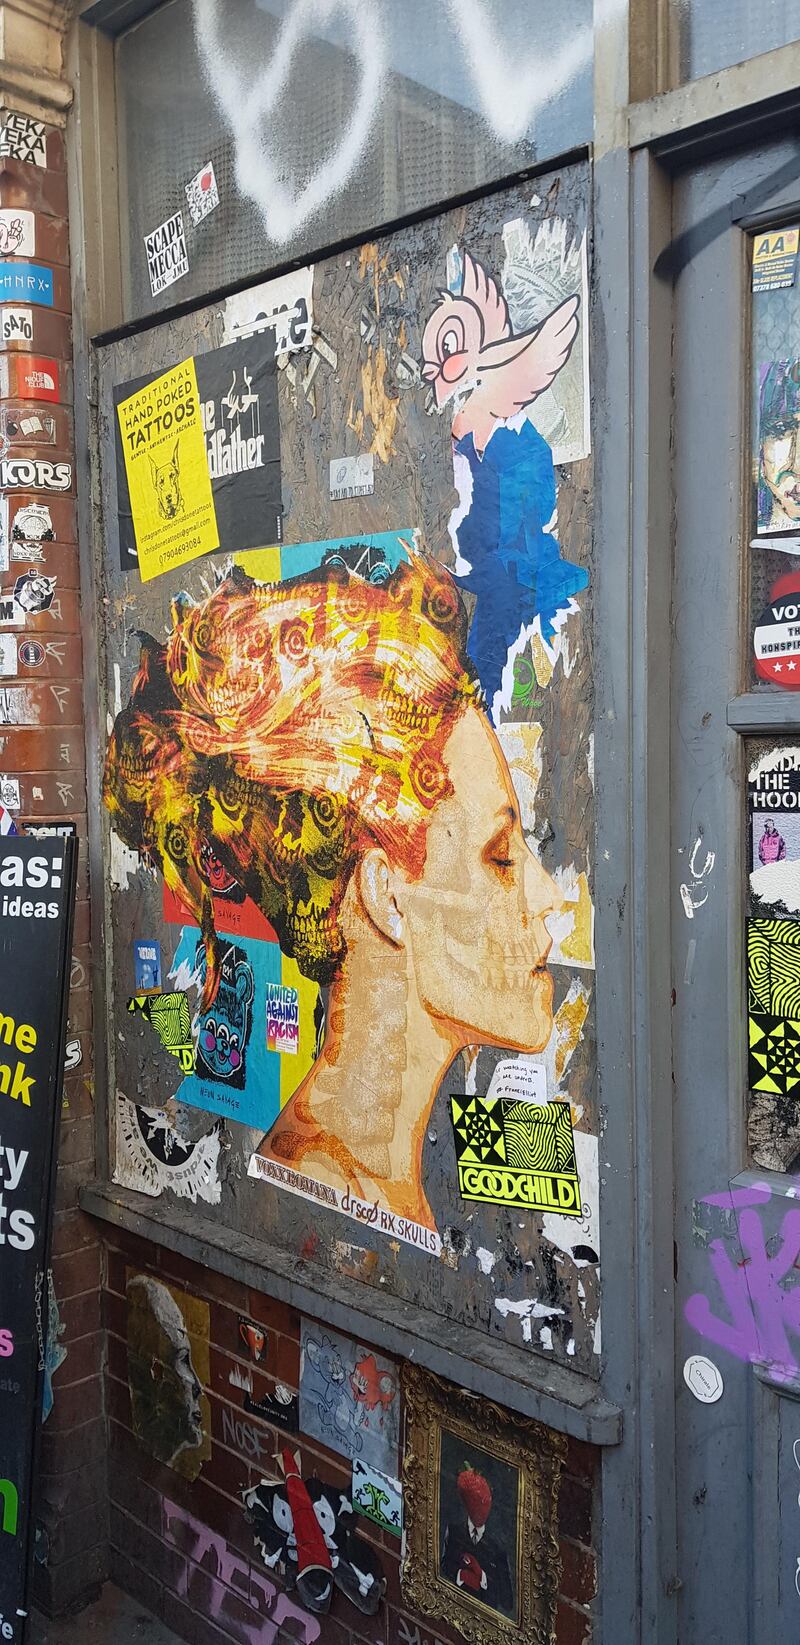 A striking mash-up of street art in Shoreditch. Photo by Rosemary Behan